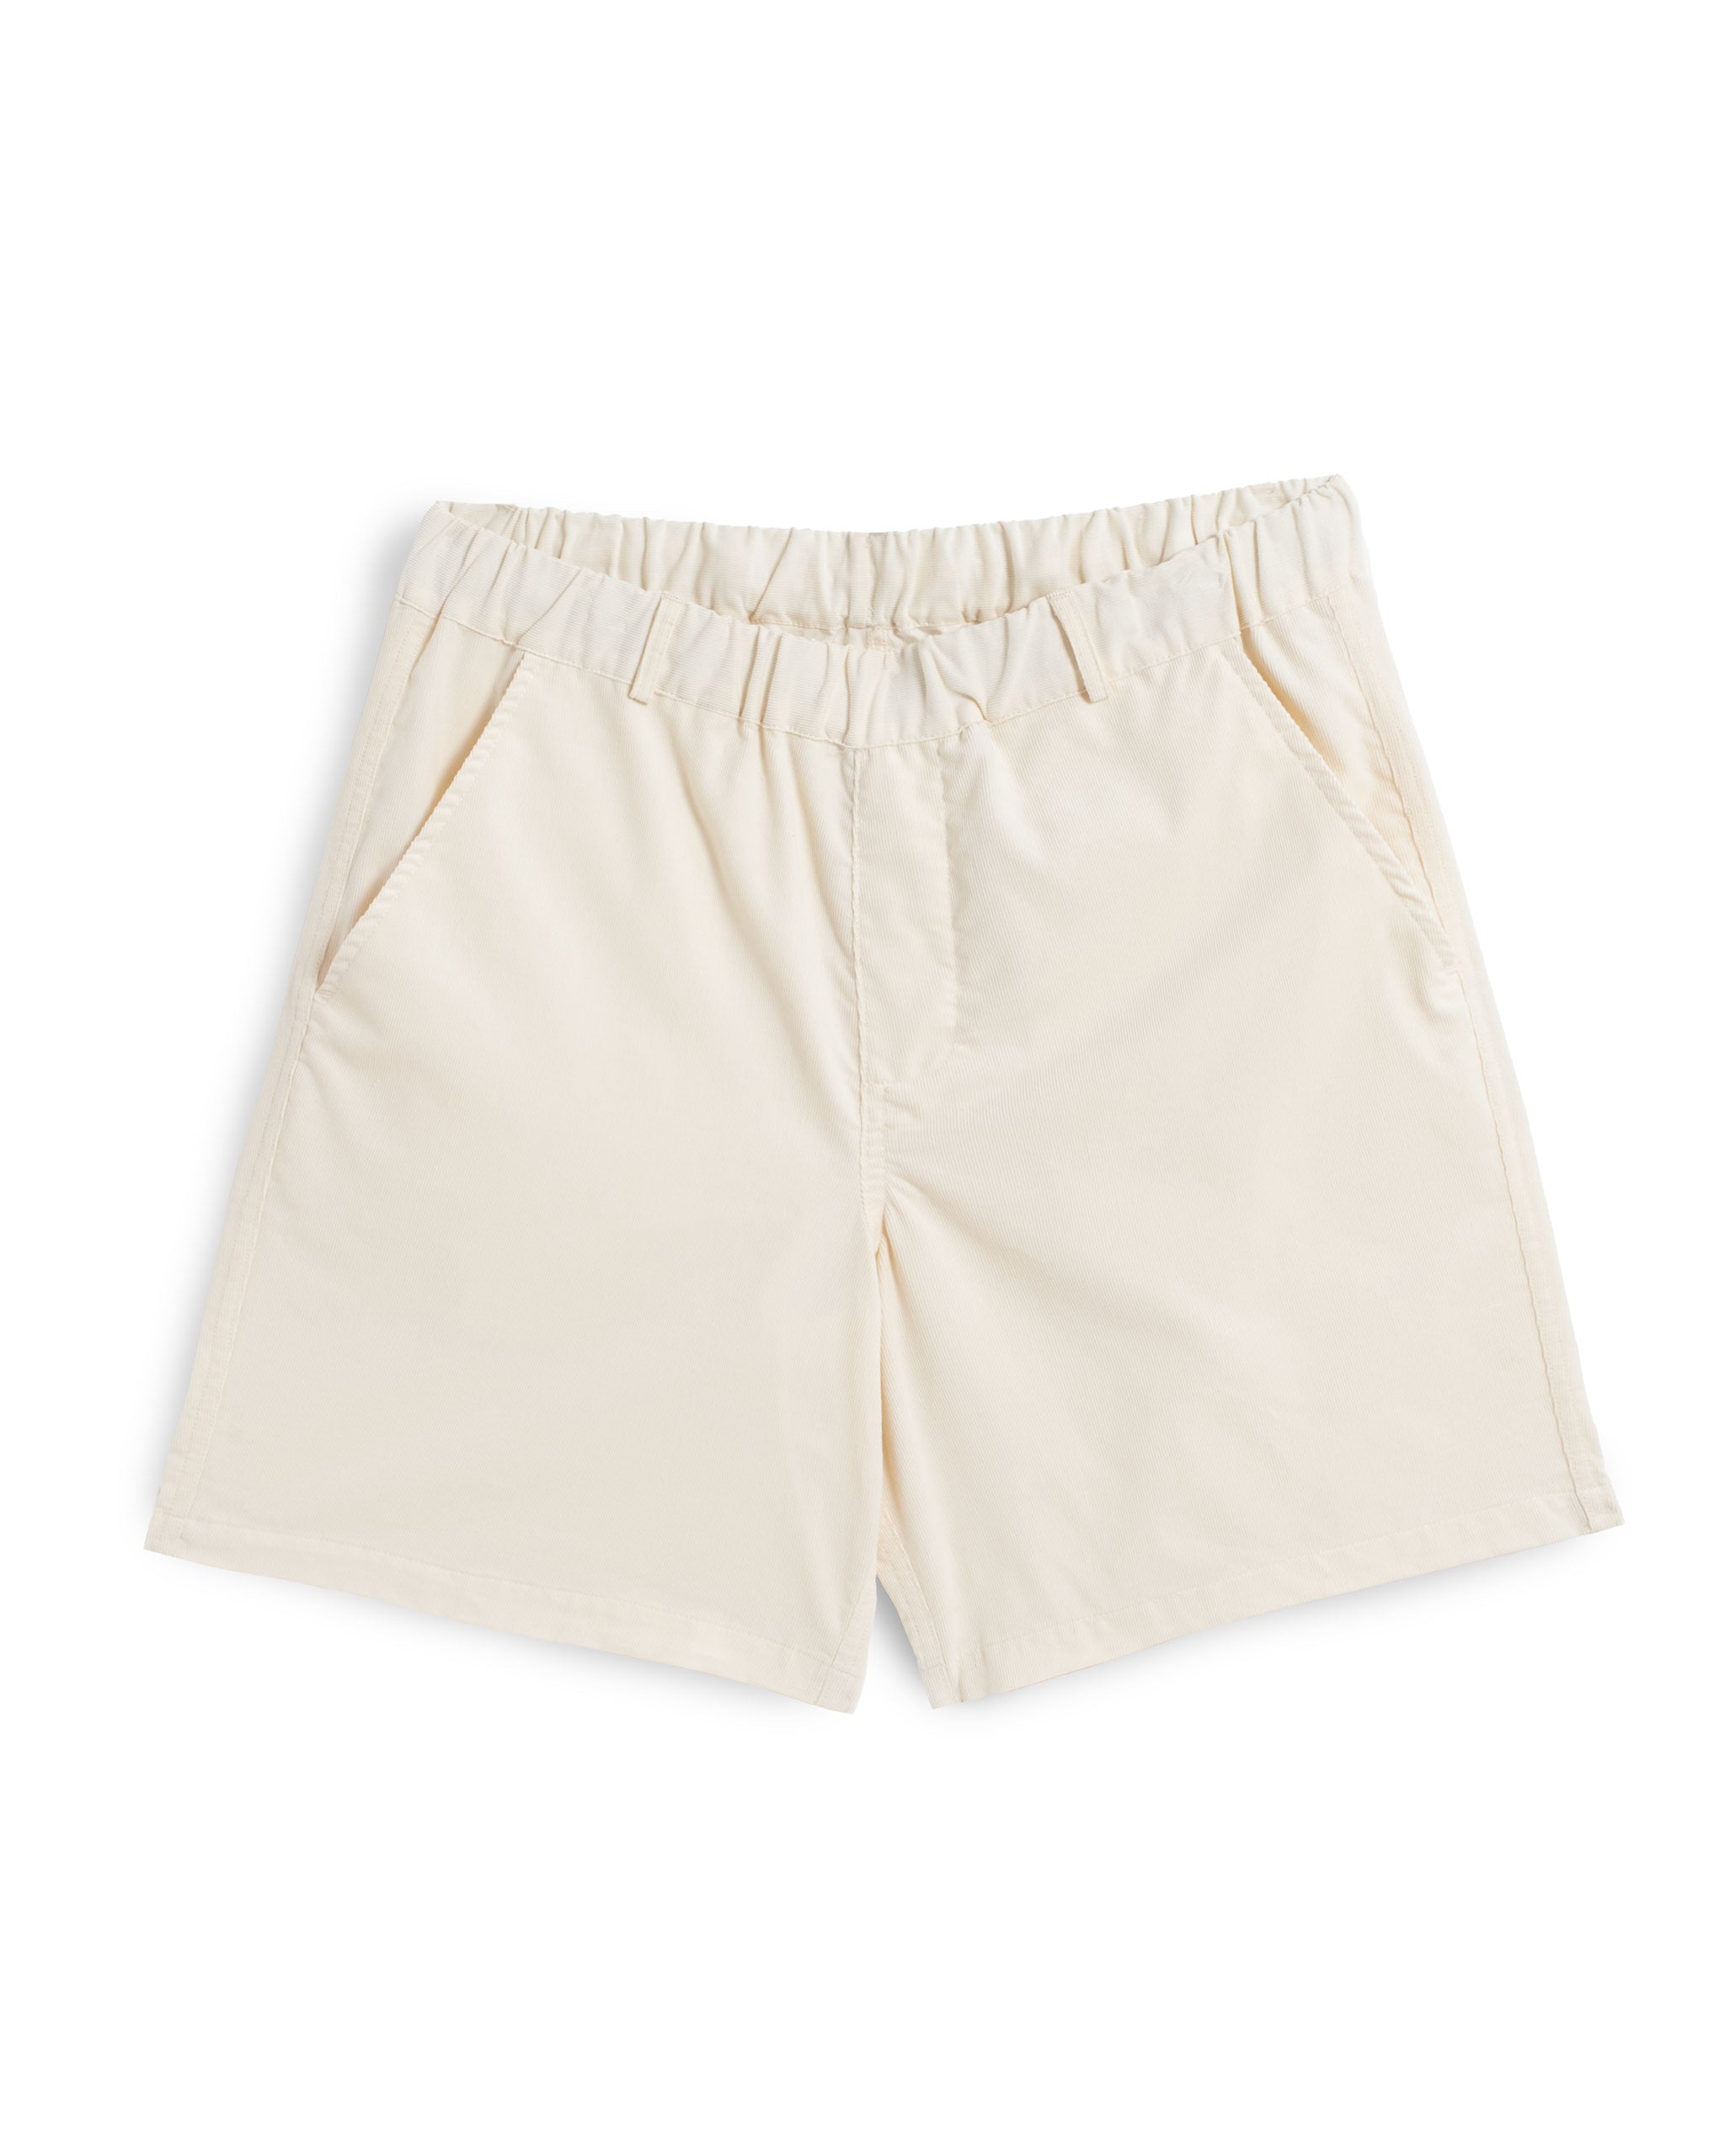 Solid Natural Cotton Corduroy Leisure Shorts